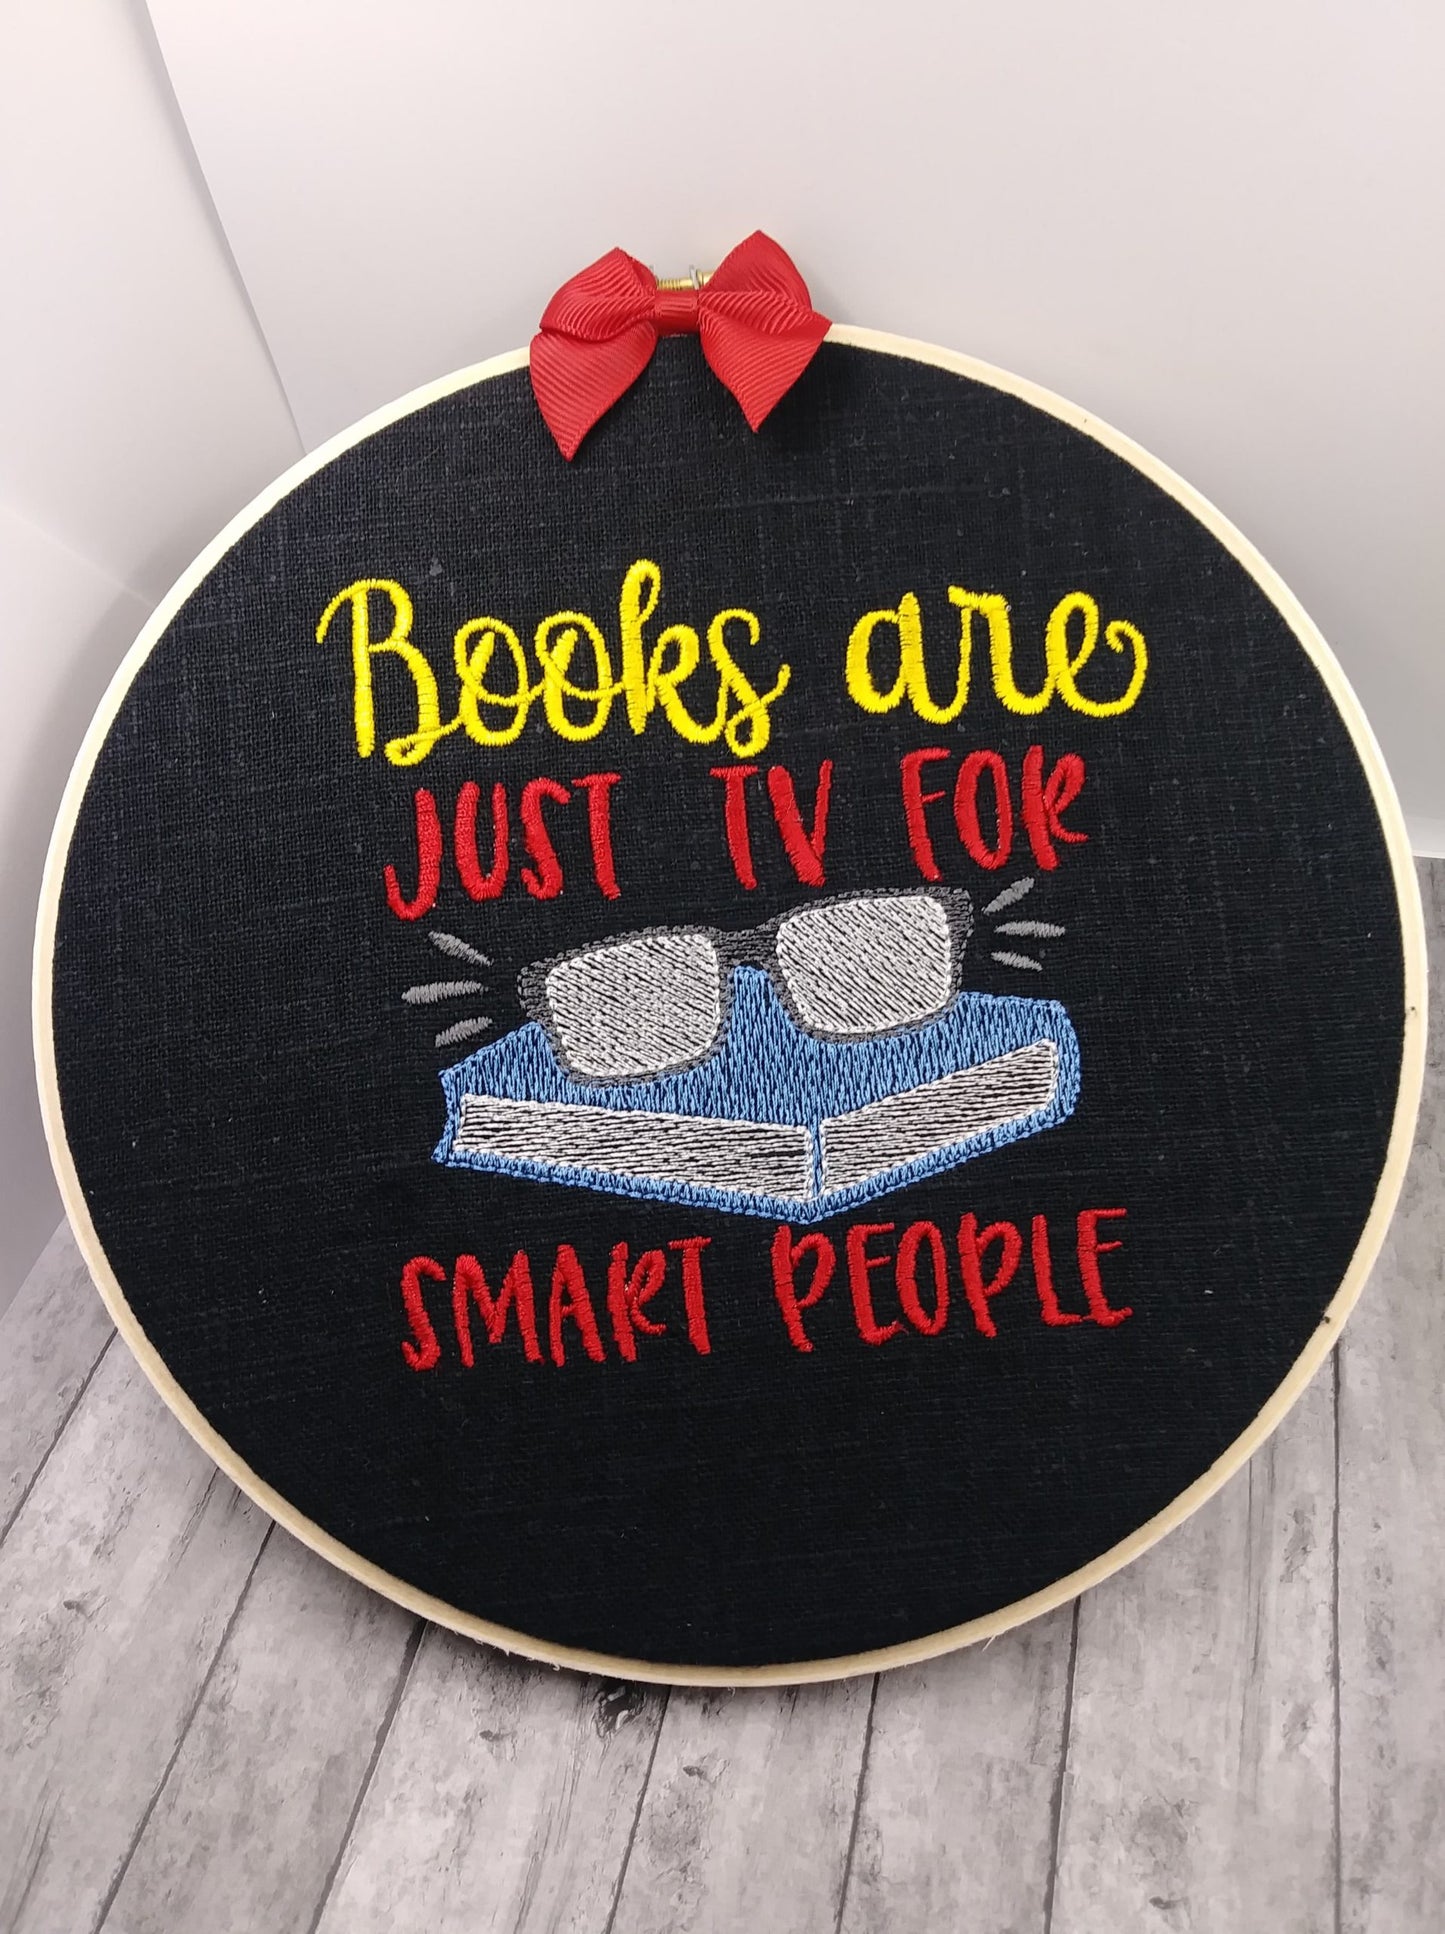 TV for smart people - 3 sizes- Digital Embroidery Design